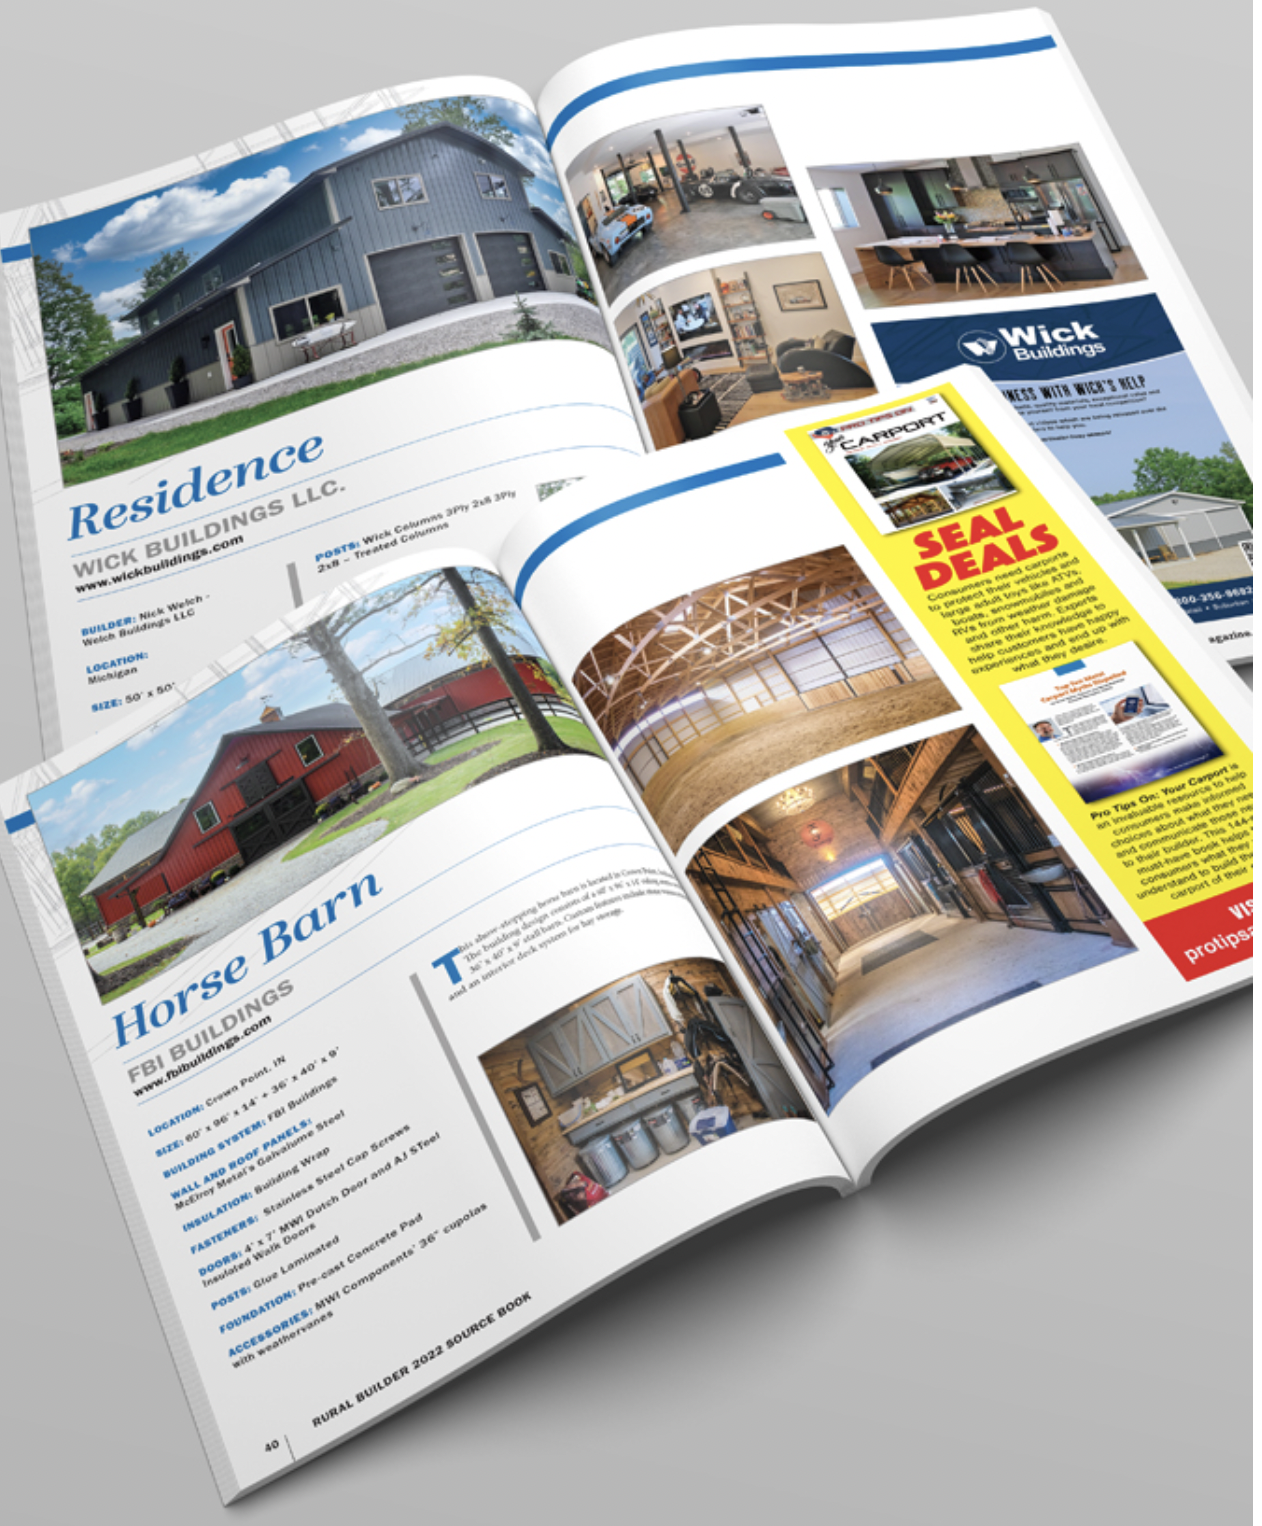 Make Your Marketing Easy with the Rural Builder Source Book!